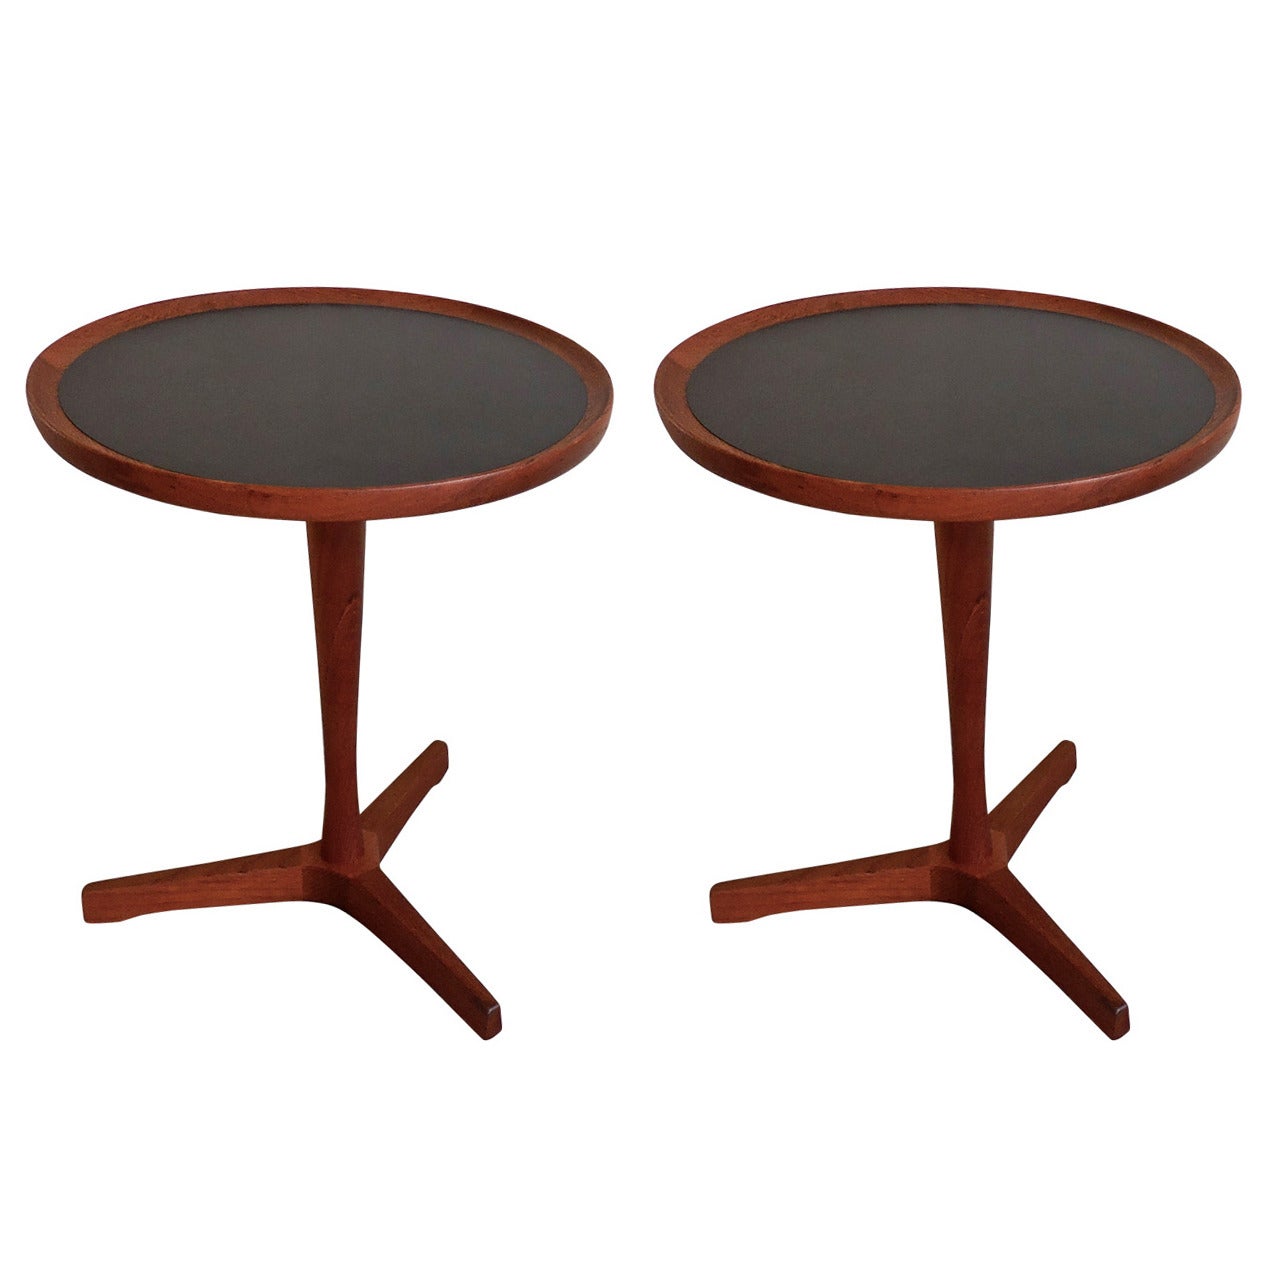 Beautifully Constructed 1950s Side Tables by Hans C. Andersen